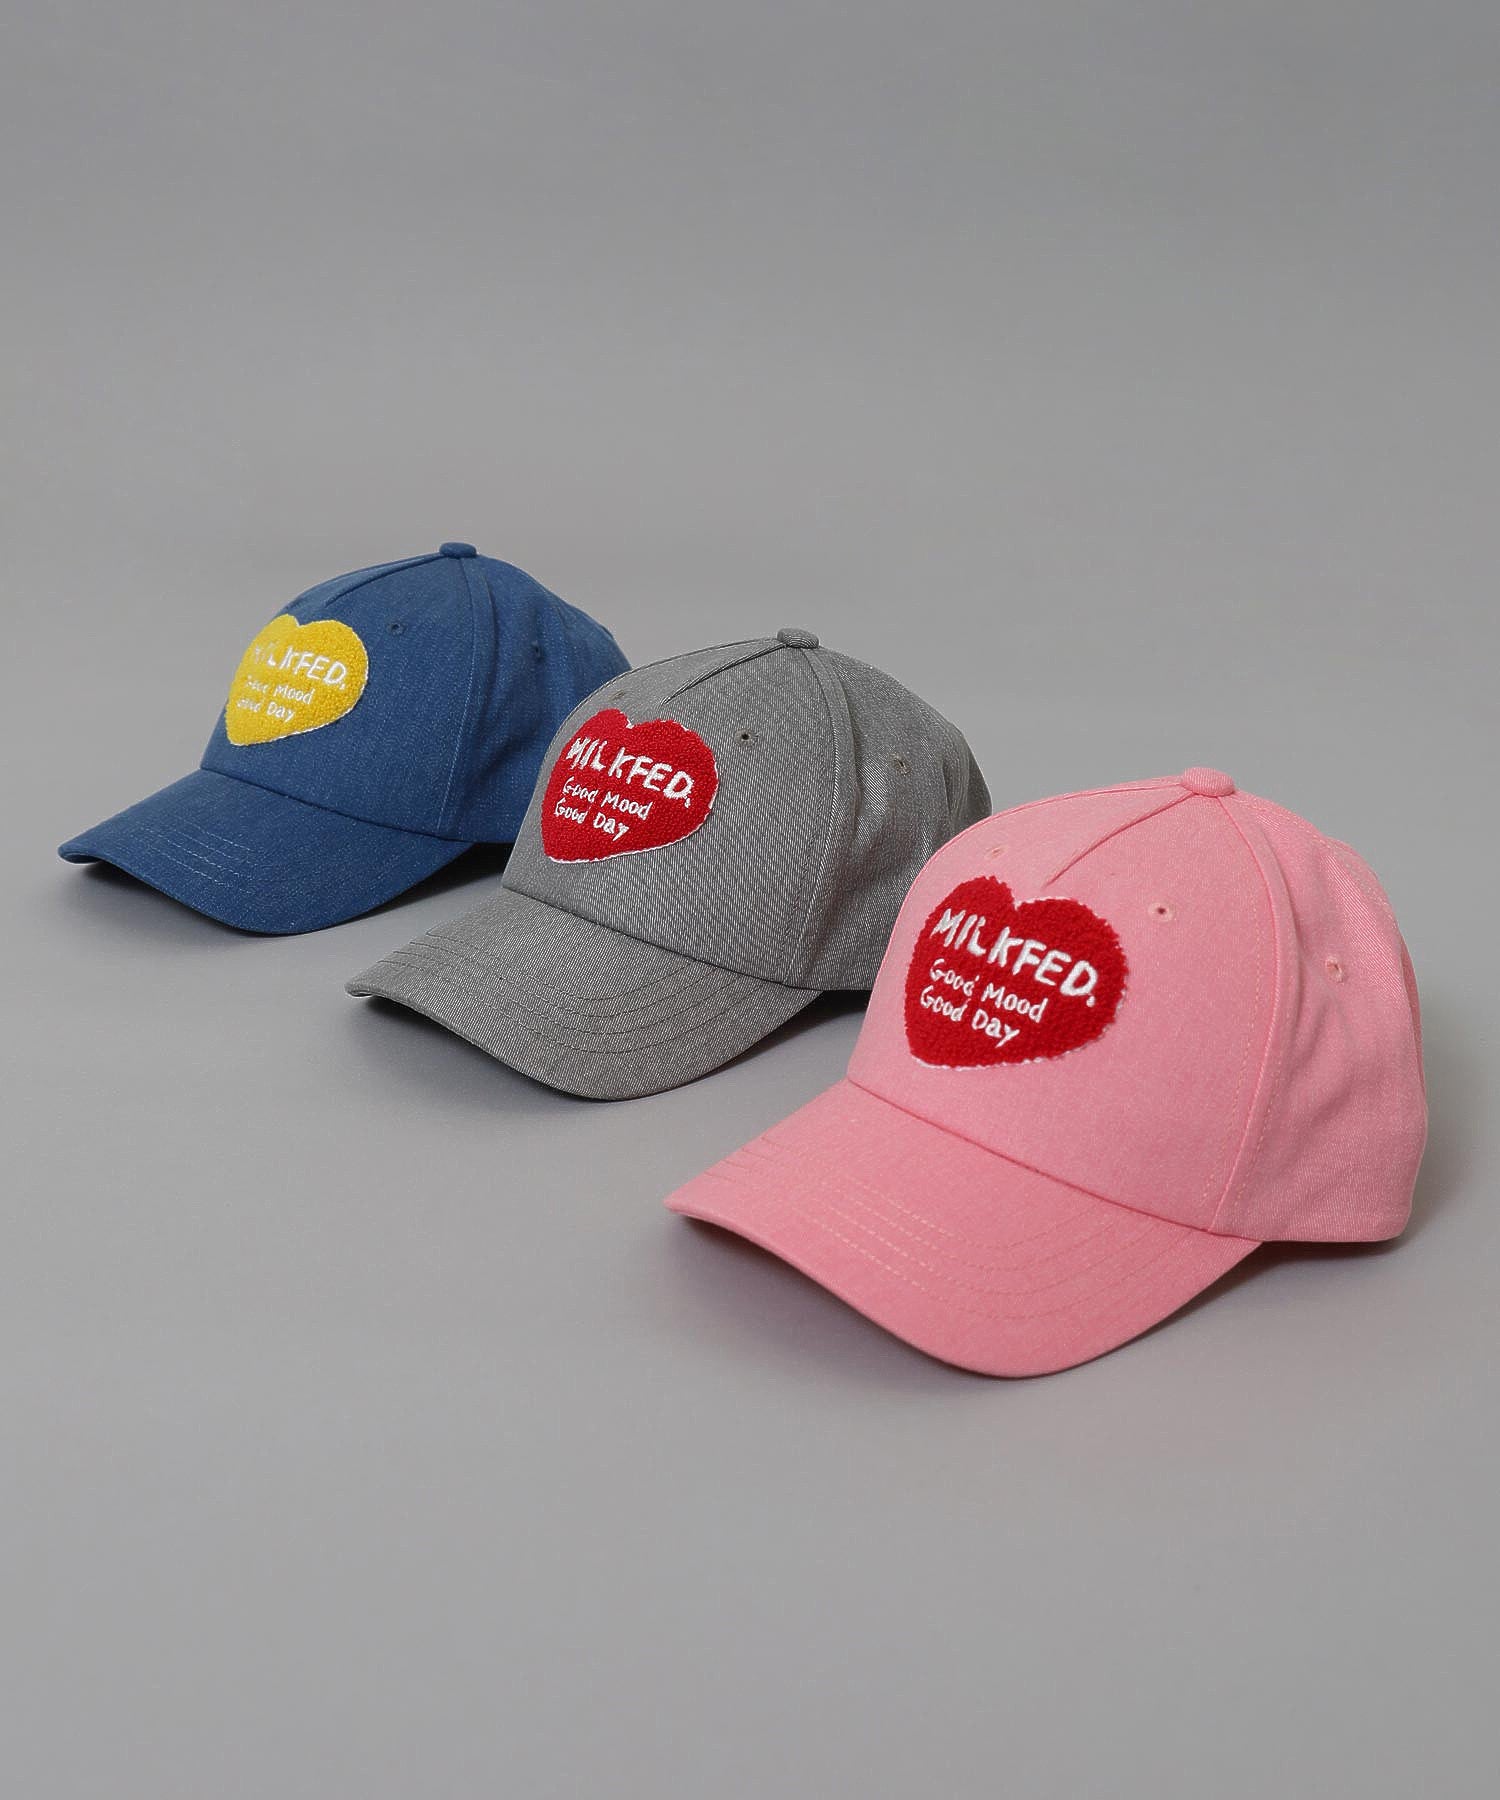 G.M.G.D EMBROIDERED CAP